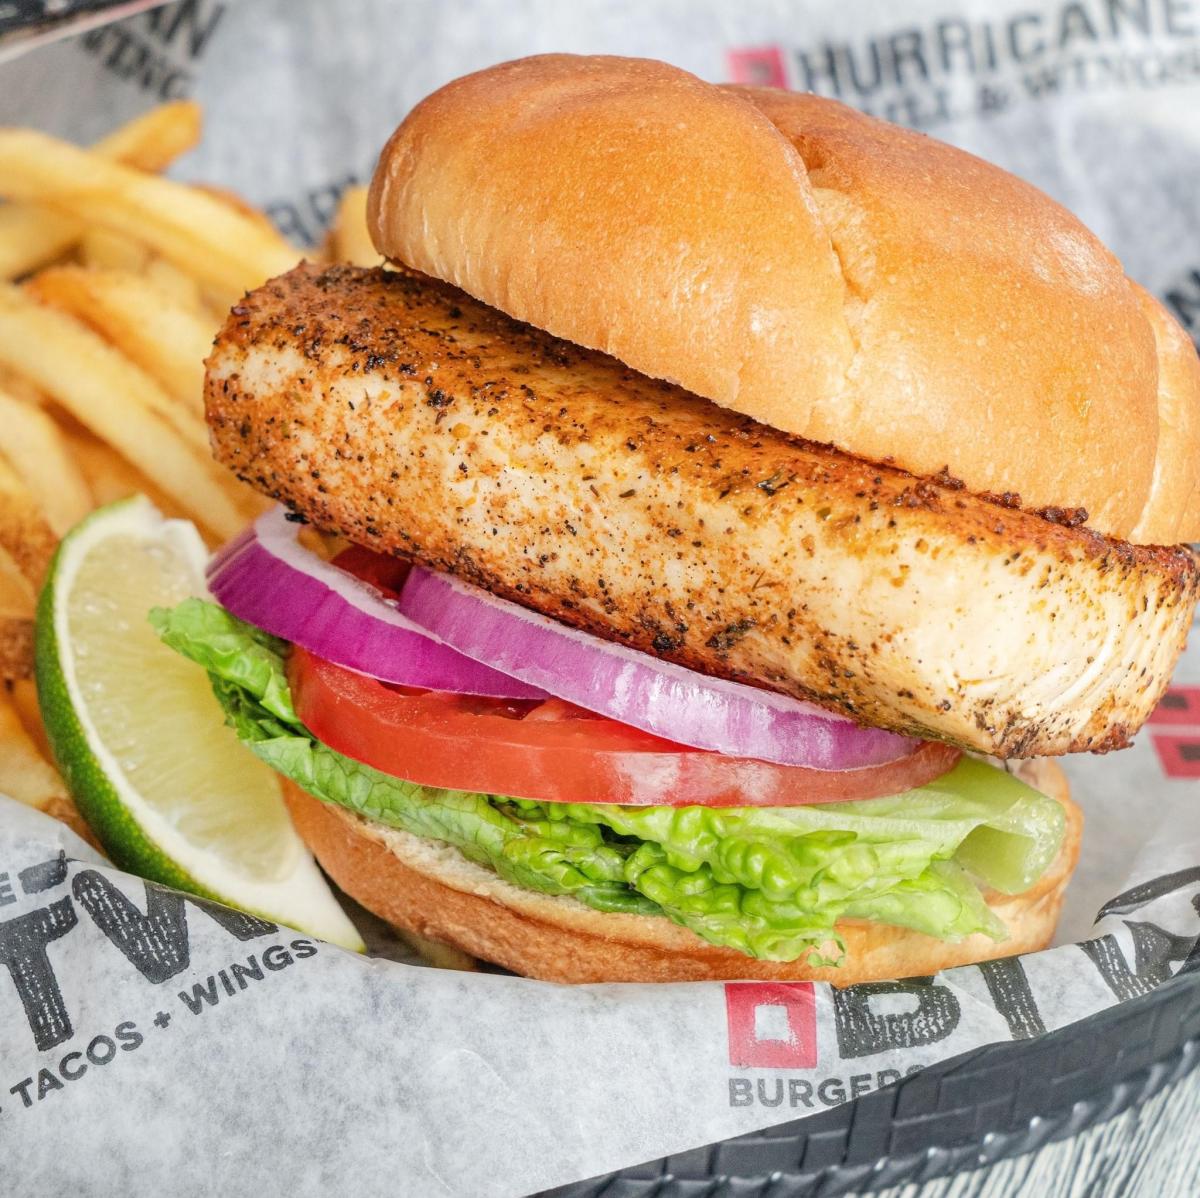 A chicken sandwich is served with a side of fries at Hurricane Sports Grill